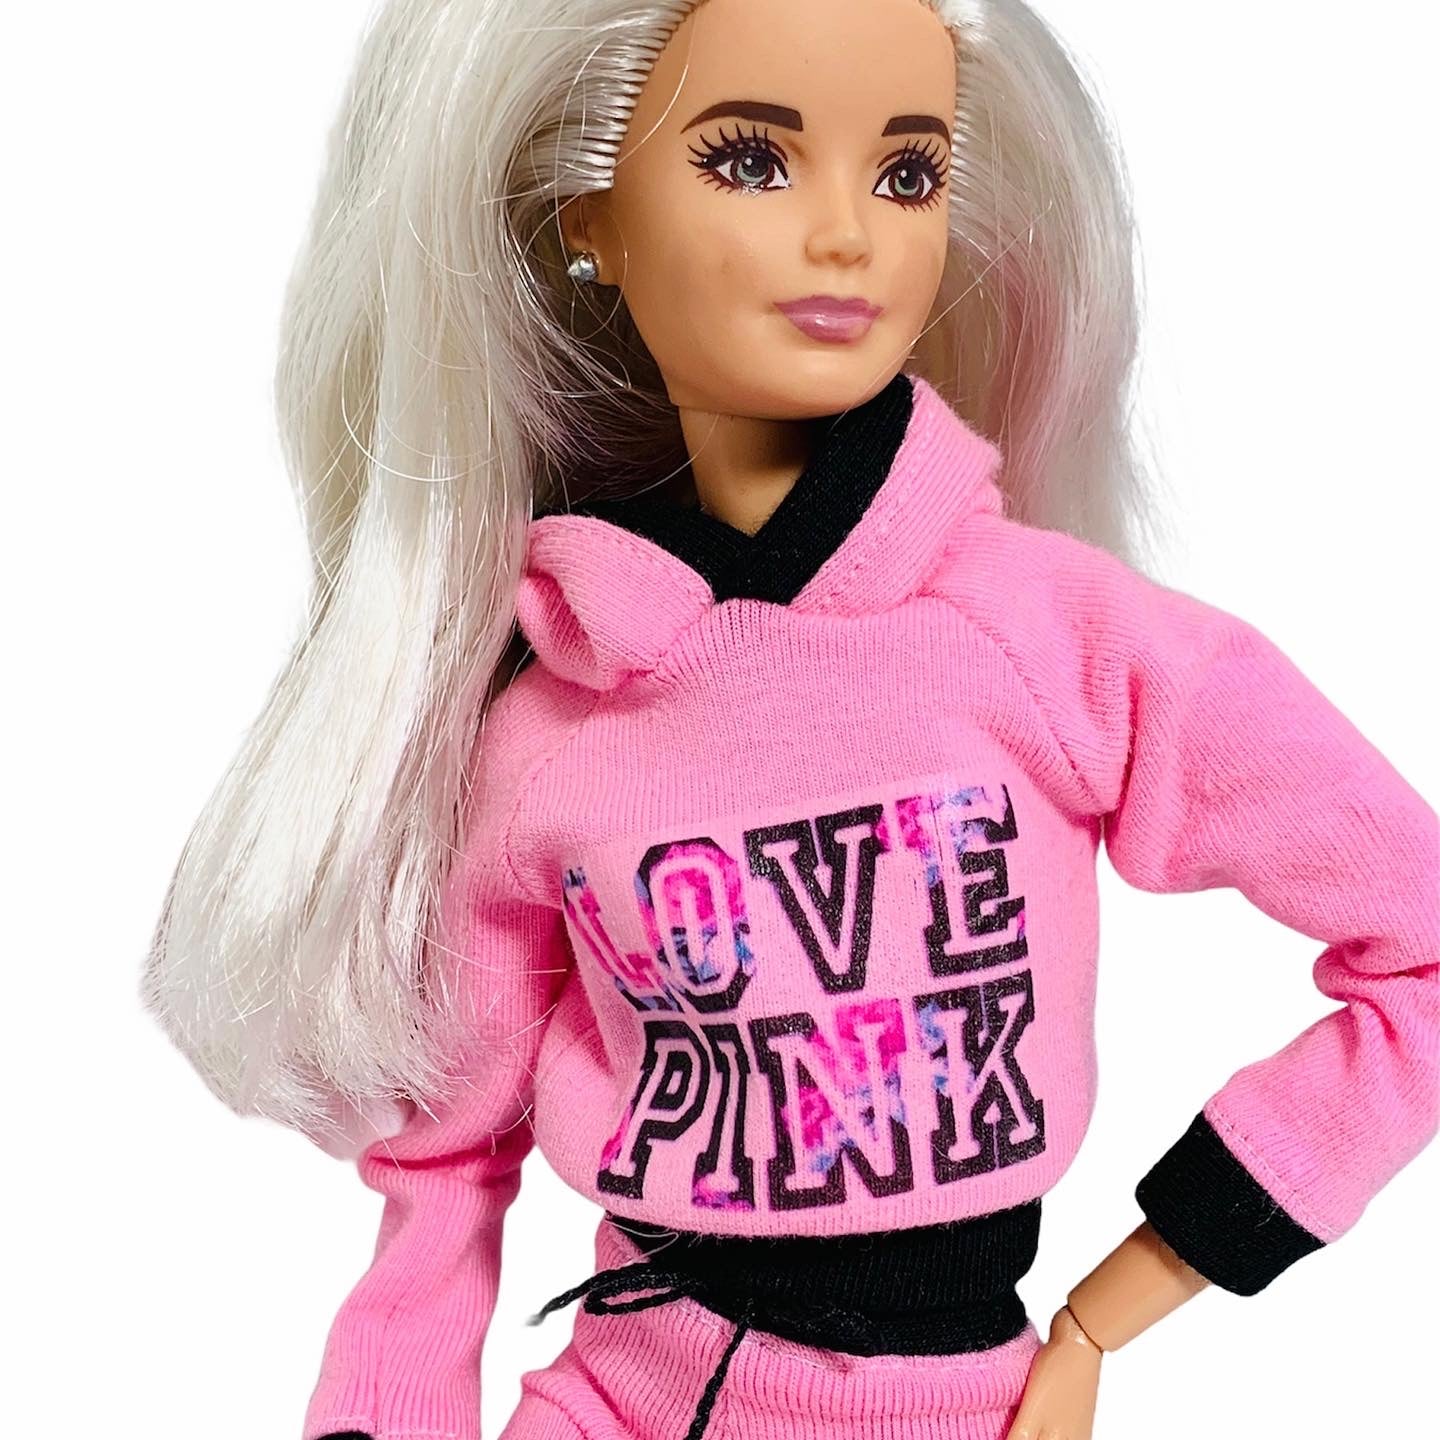 Pink crop top and pink shorts for barbie doll – The Doll Tailor